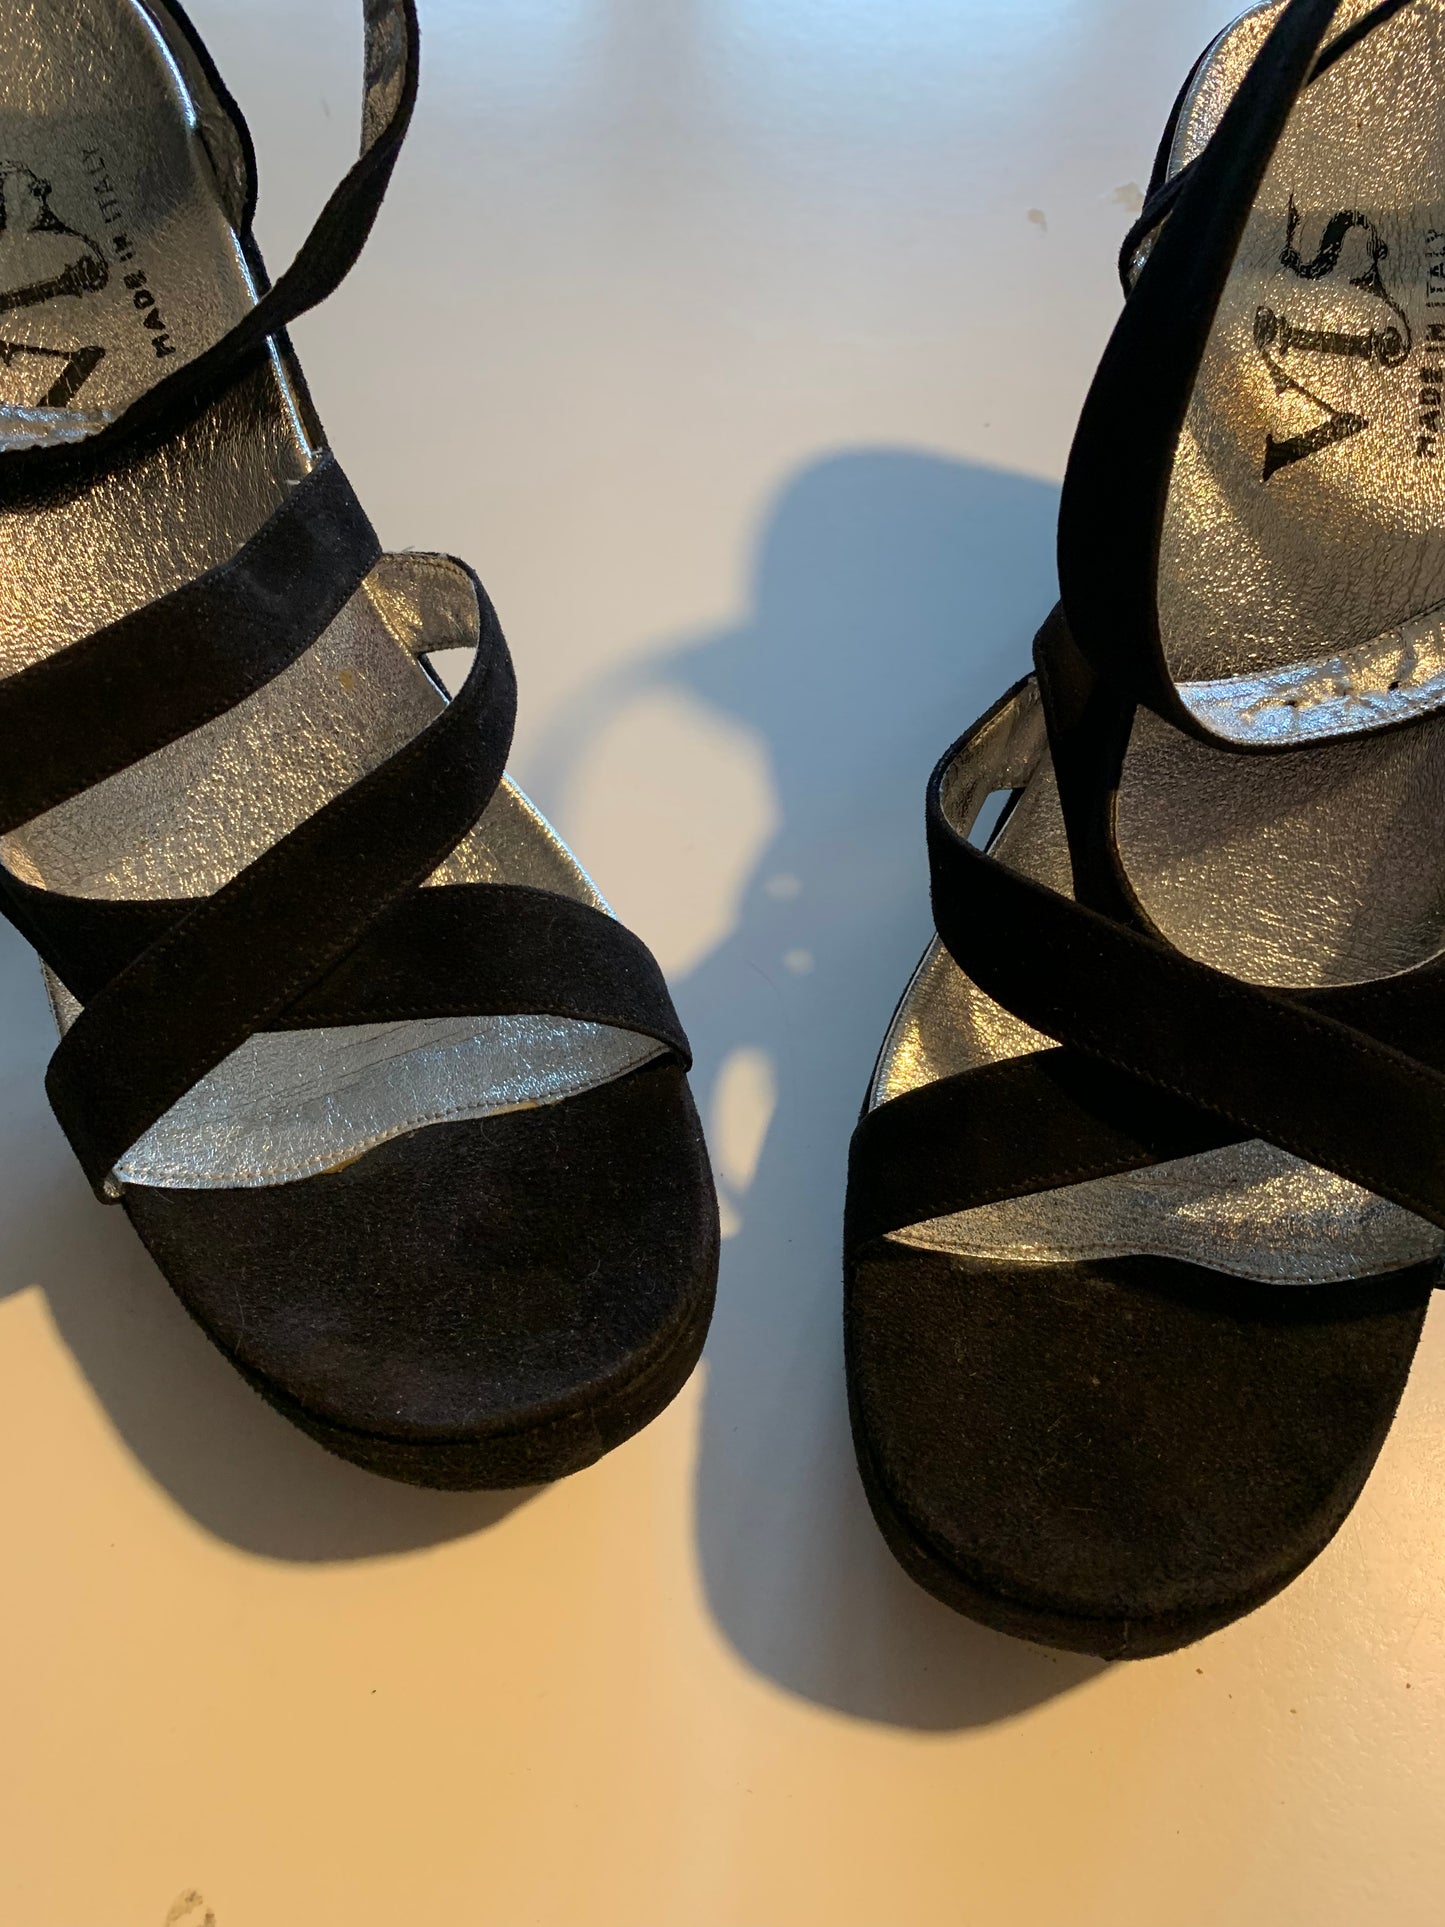 Strappy Black and Metallic Silver Ankle Wrap Suede Platform Shoes circa 1970s 9.5